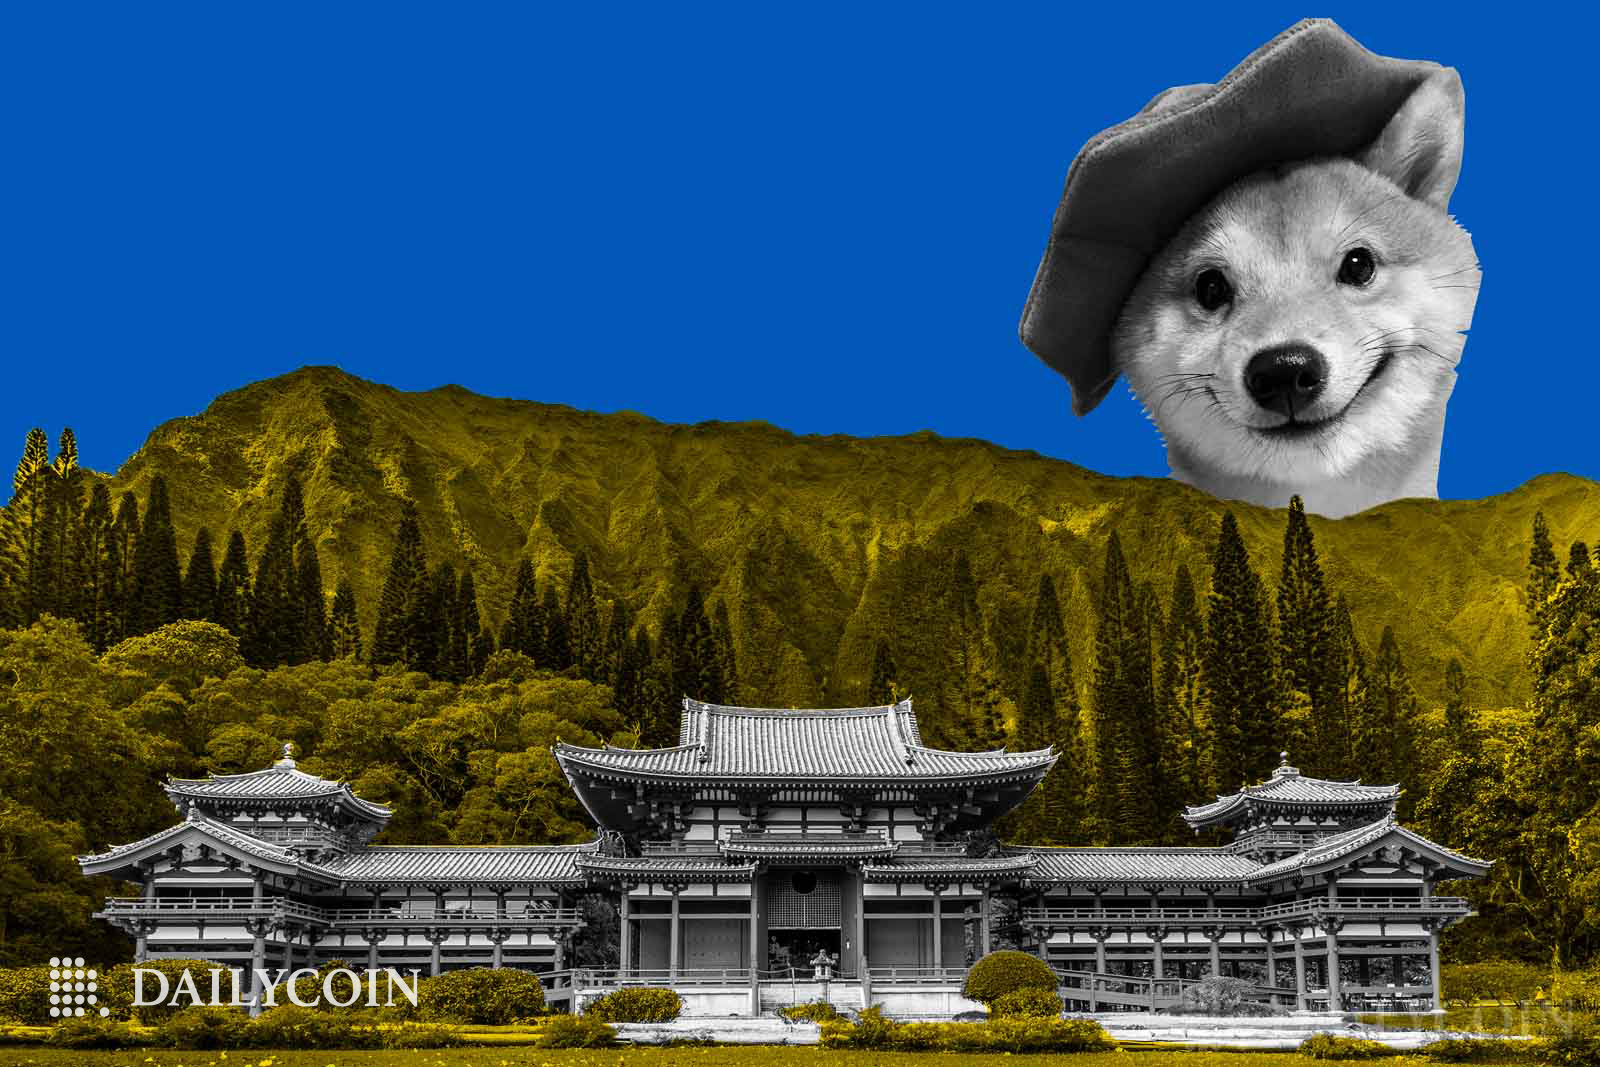 Shiba Inu with a beret on his head looking over tiny house